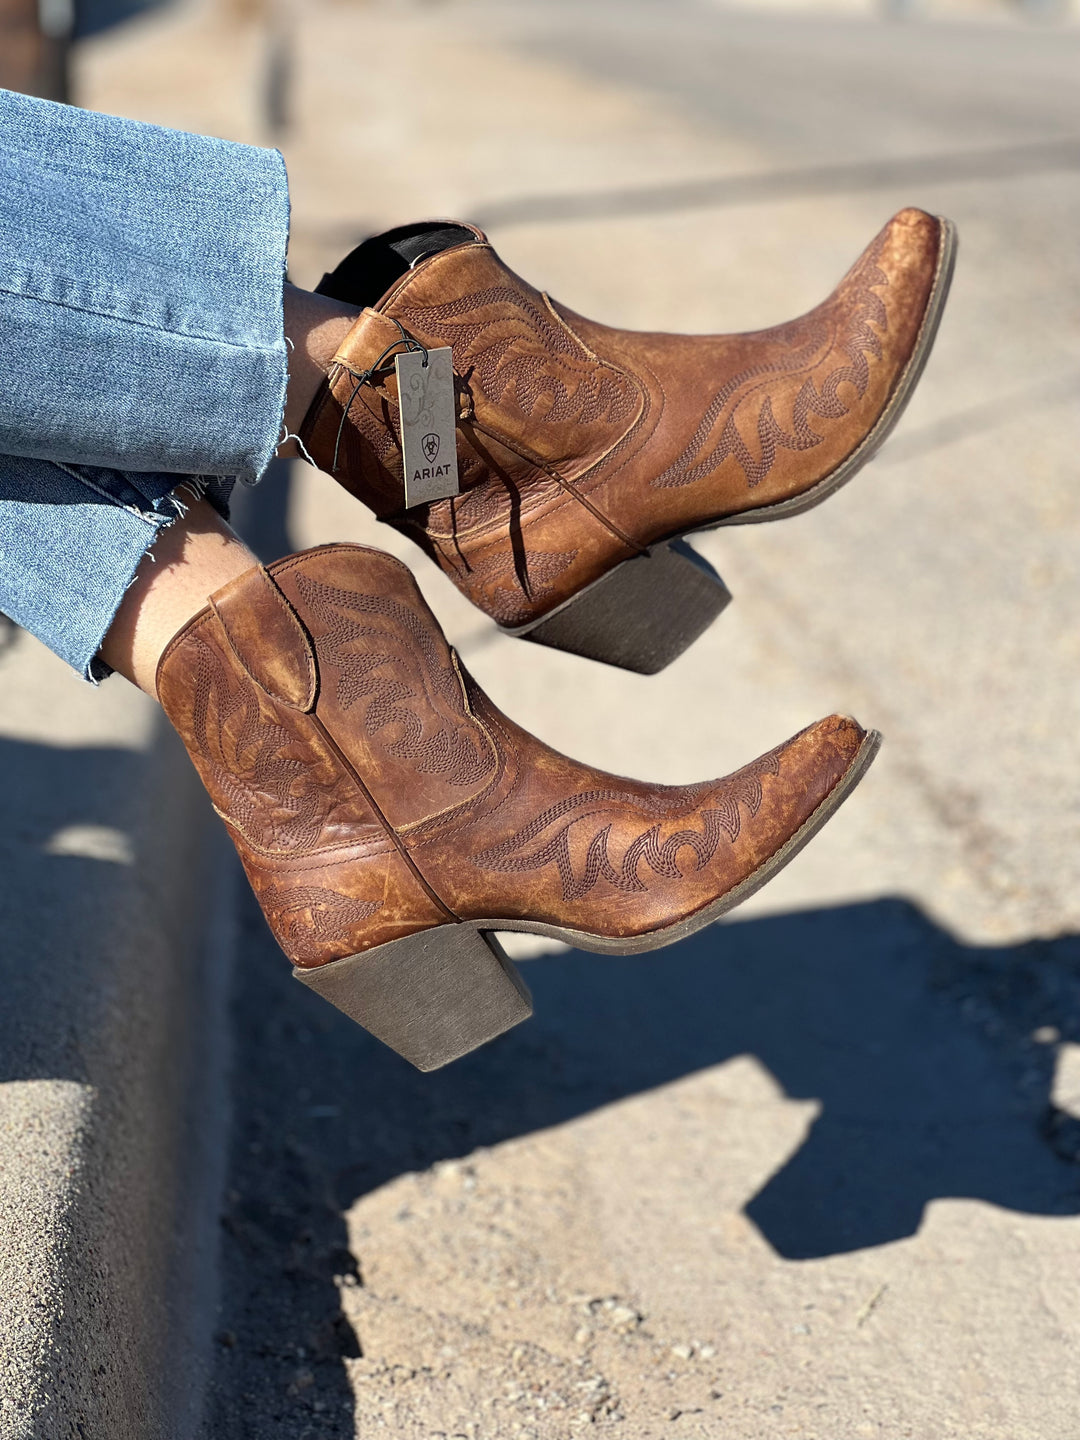 Chandler Tan Booties by Ariat